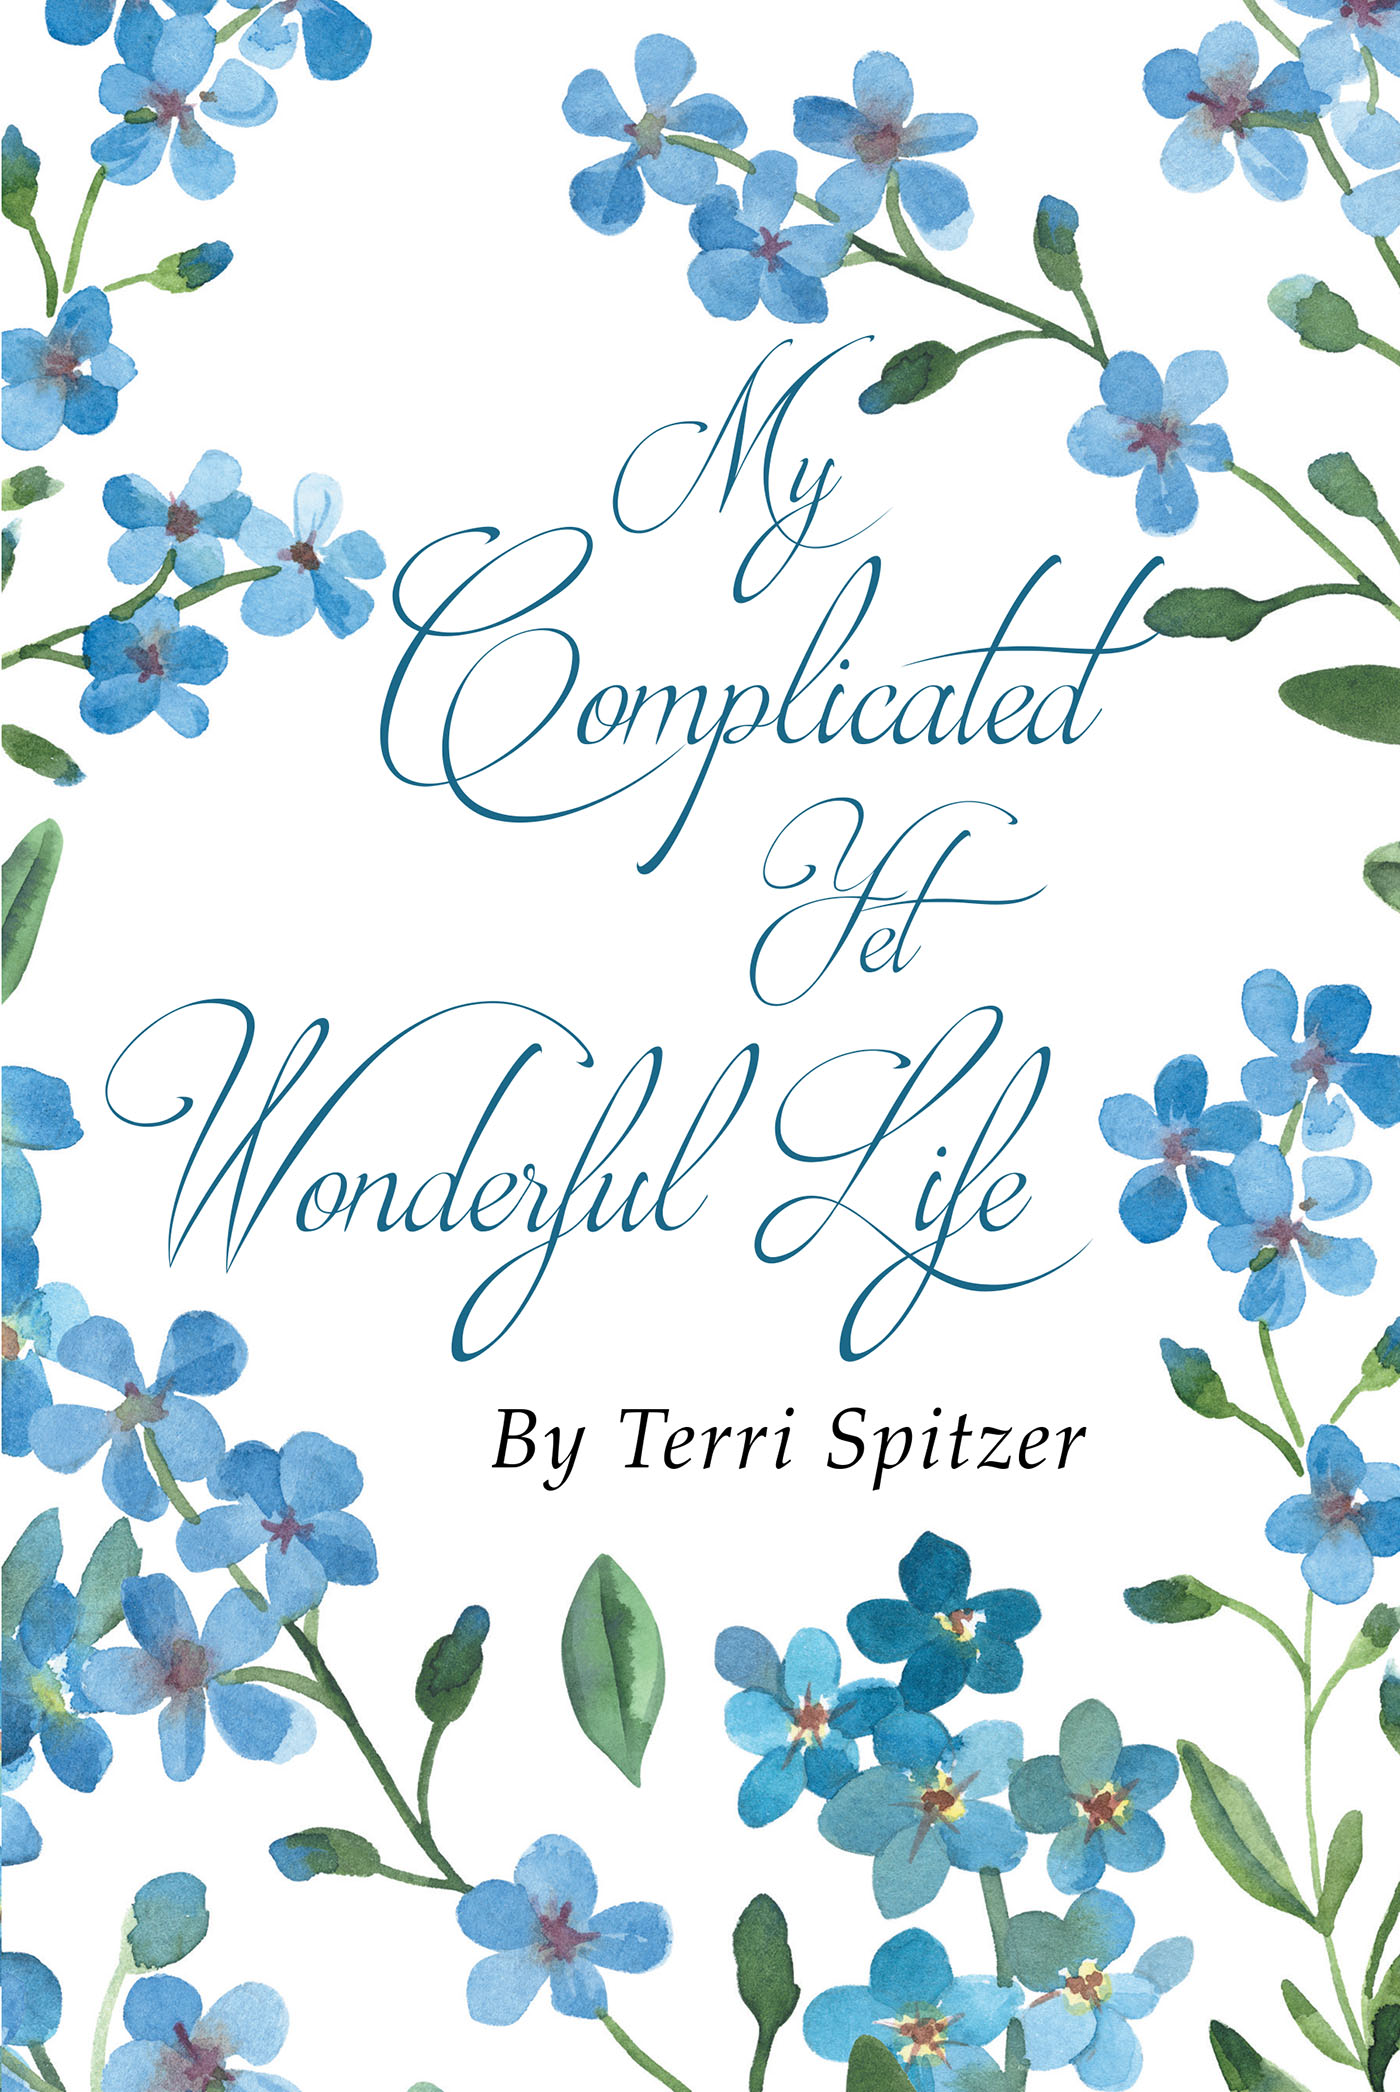 Author Terri Spitzer’s Book, "My Complicated Yet Wonderful Life," is an Inspiring Work Recalling the Myriad Challenges She Has Faced Since Her Leukemia Diagnosis in 1975